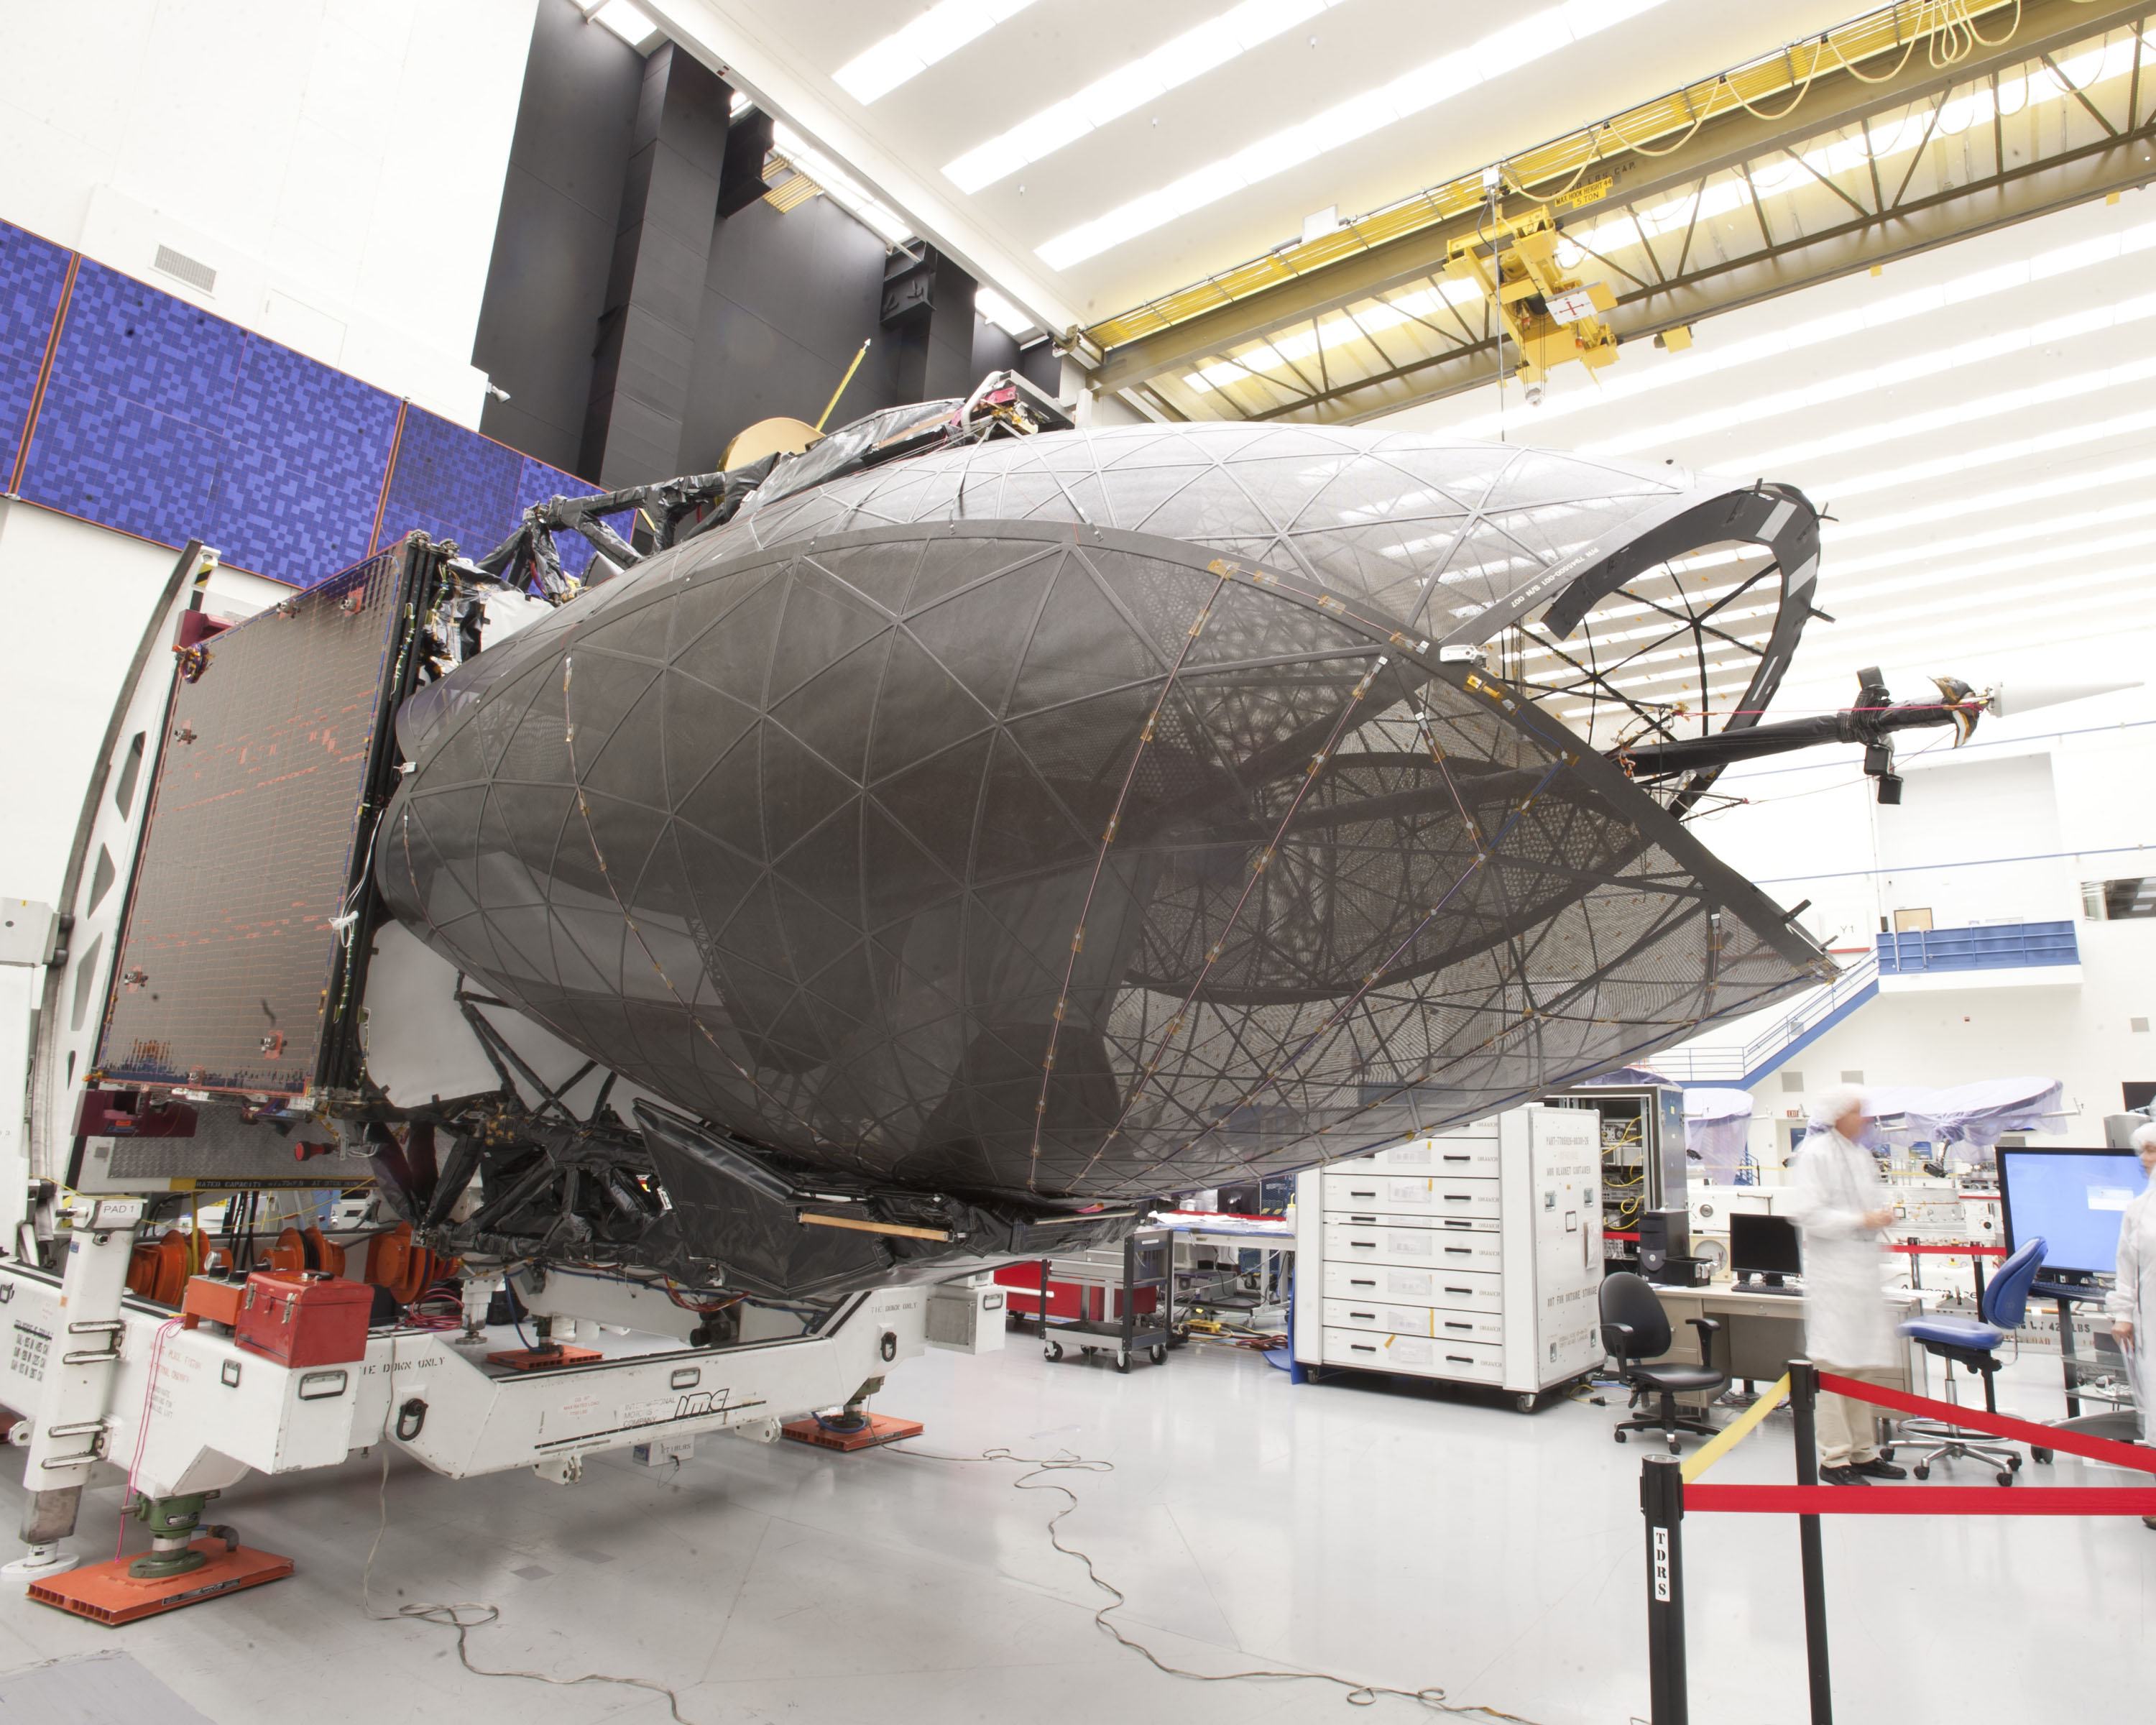 Like an oversized insect, TDRS-L is visually quite distinct from its cousins of the shuttle-launched first generation of Tracking and Data Relay Satellites. Photo Credit: NASA